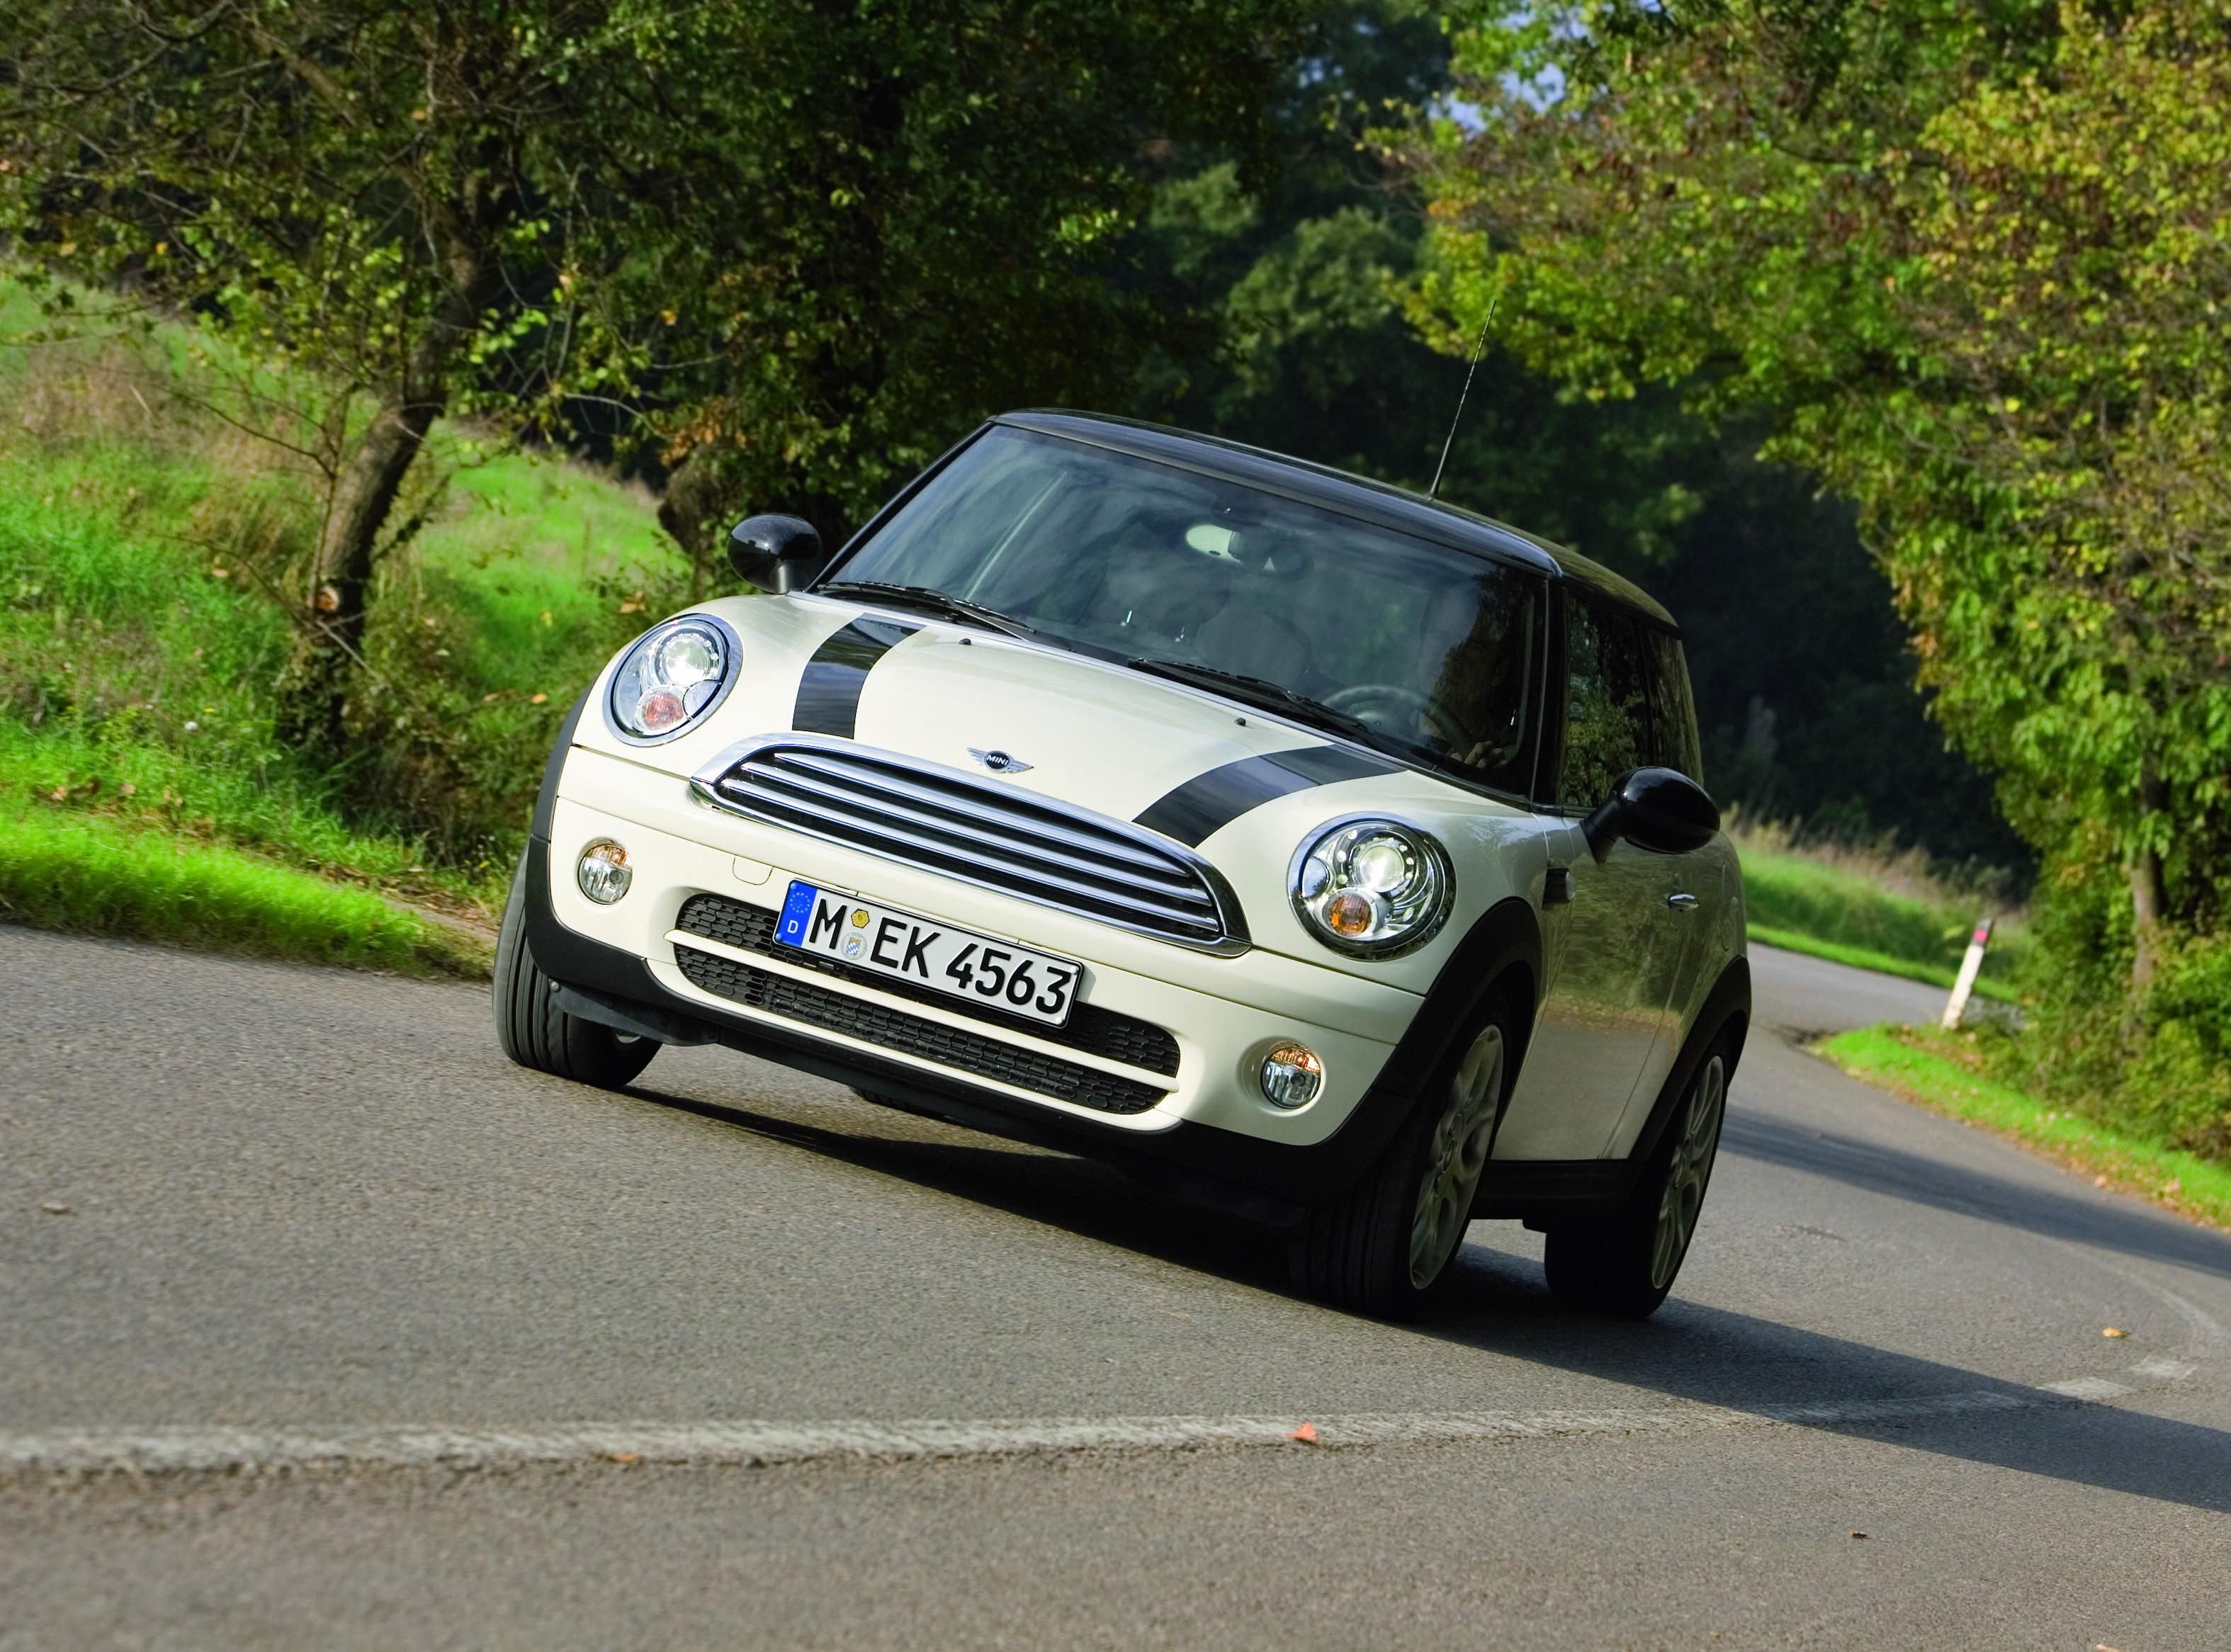 2007 MINI One and MINI Cooper D with 95Hp 1.4 petrol & 110Hp 1.6  Turbo-diesel engines